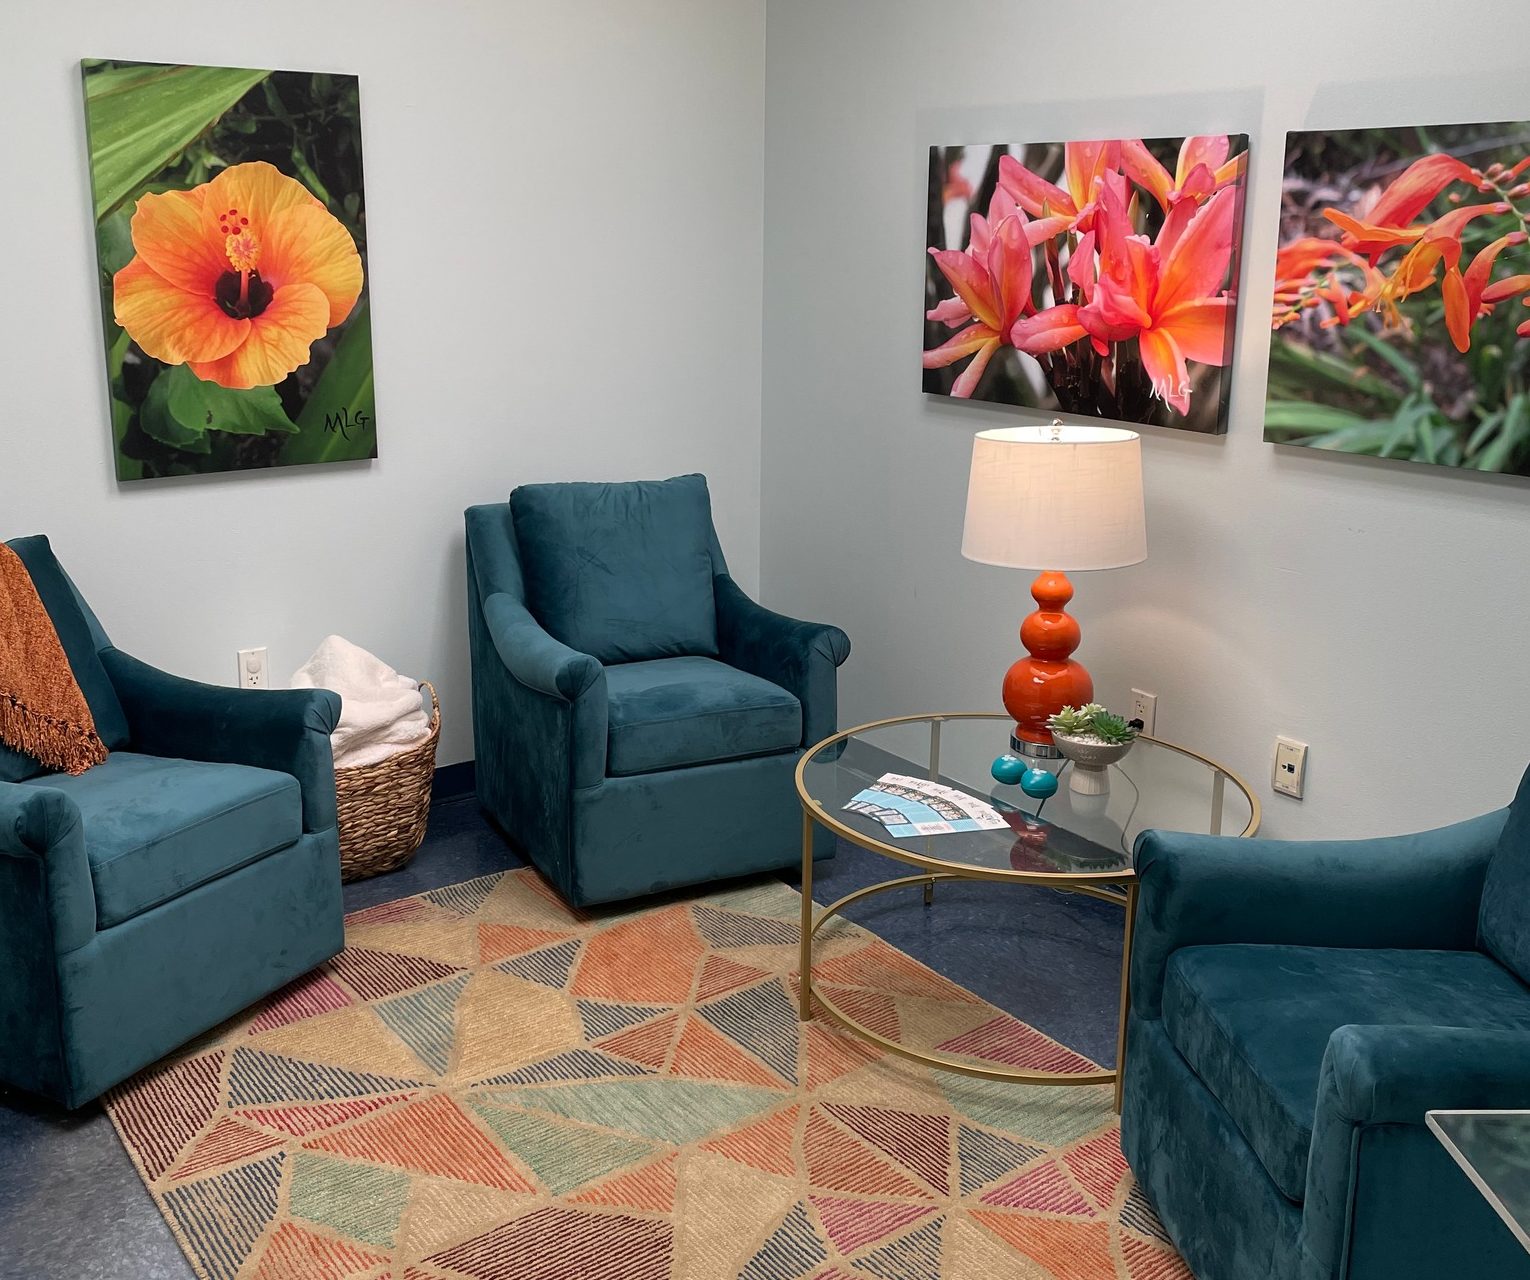 Image description: A photo of a soft interview room, including comfortable chairs, a nice carpet, muted lighting, pleasant paintings of flowers on the walls, and an oil diffusor.